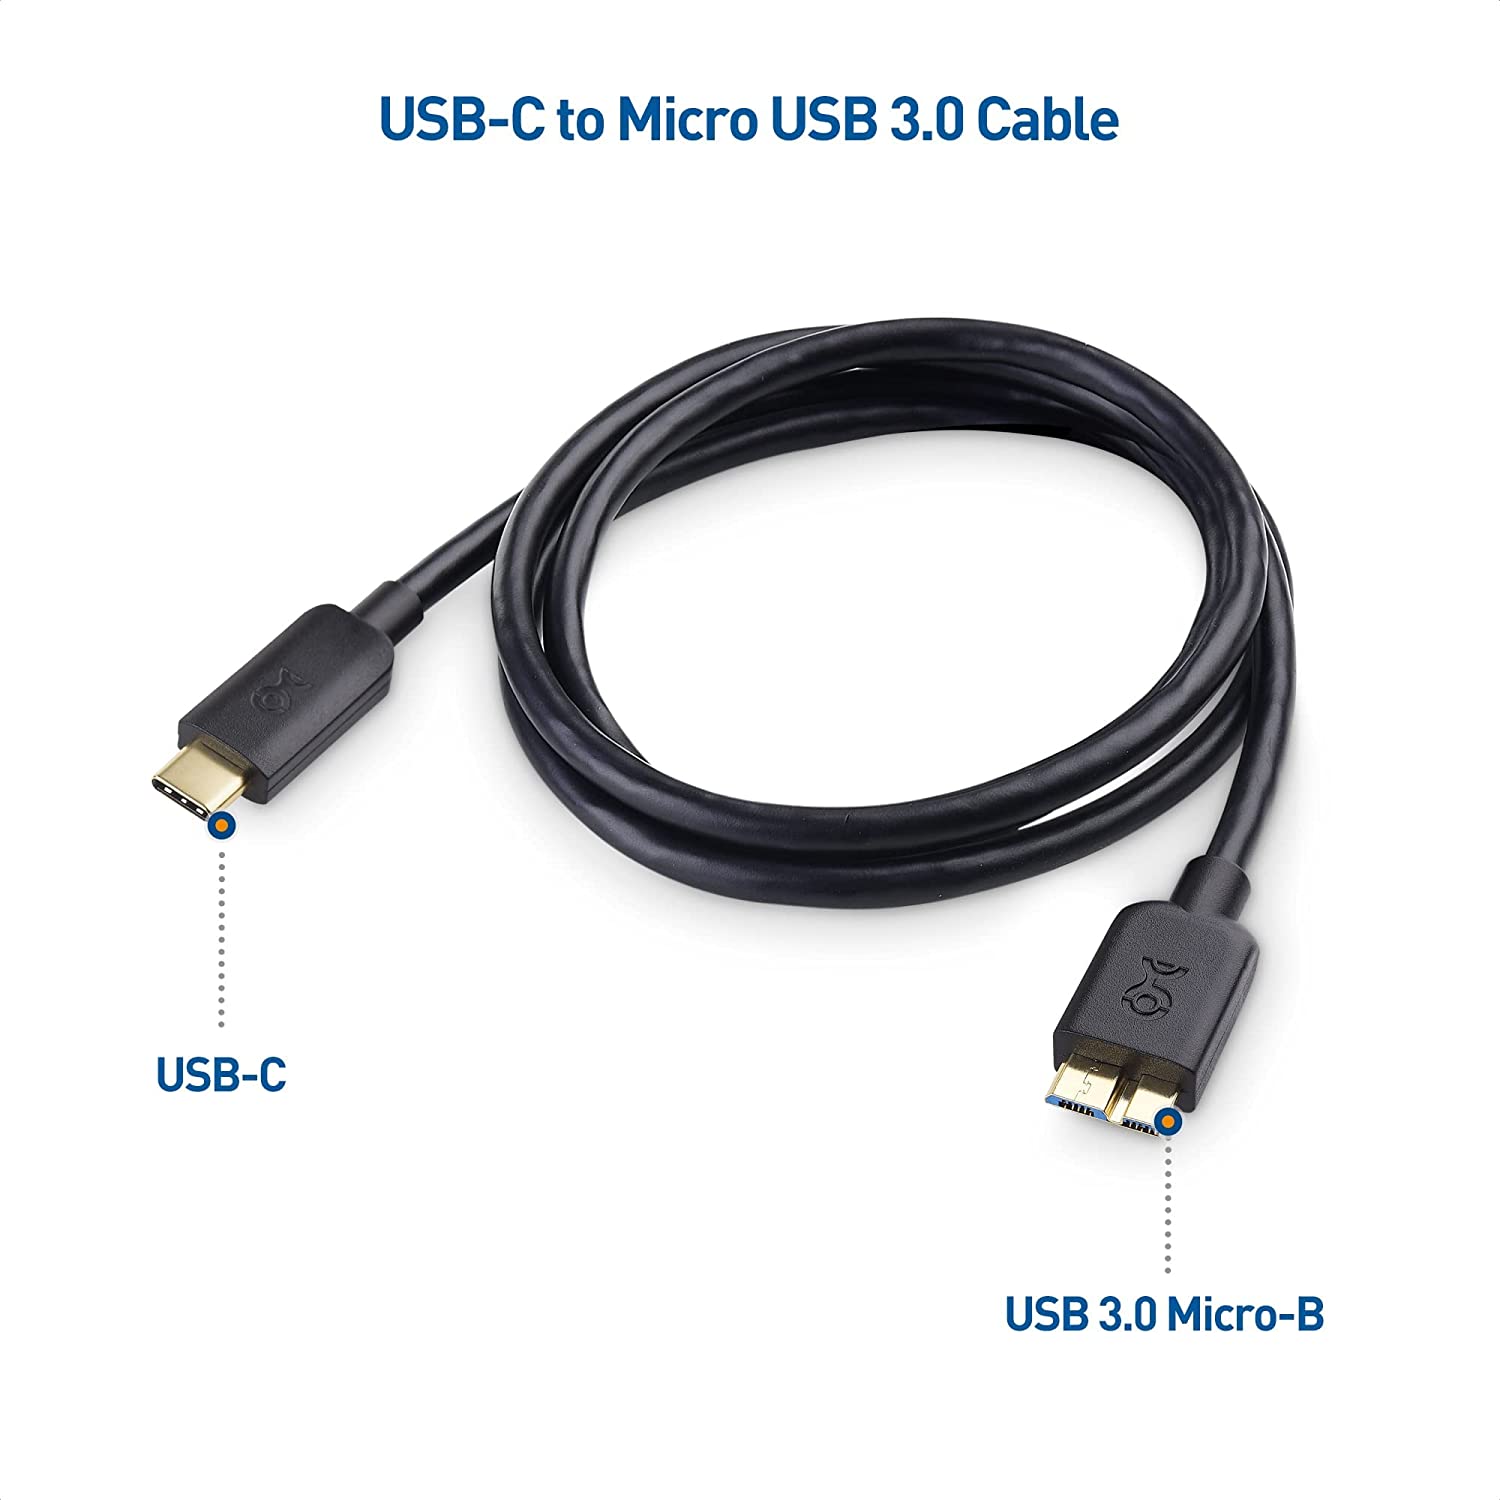 Cable Matters USB C to Micro USB 3.0 Cable (USB C to Micro B 3.0, USB C Hard Drive Cable) in Black 3.3 Feet - image 3 of 7